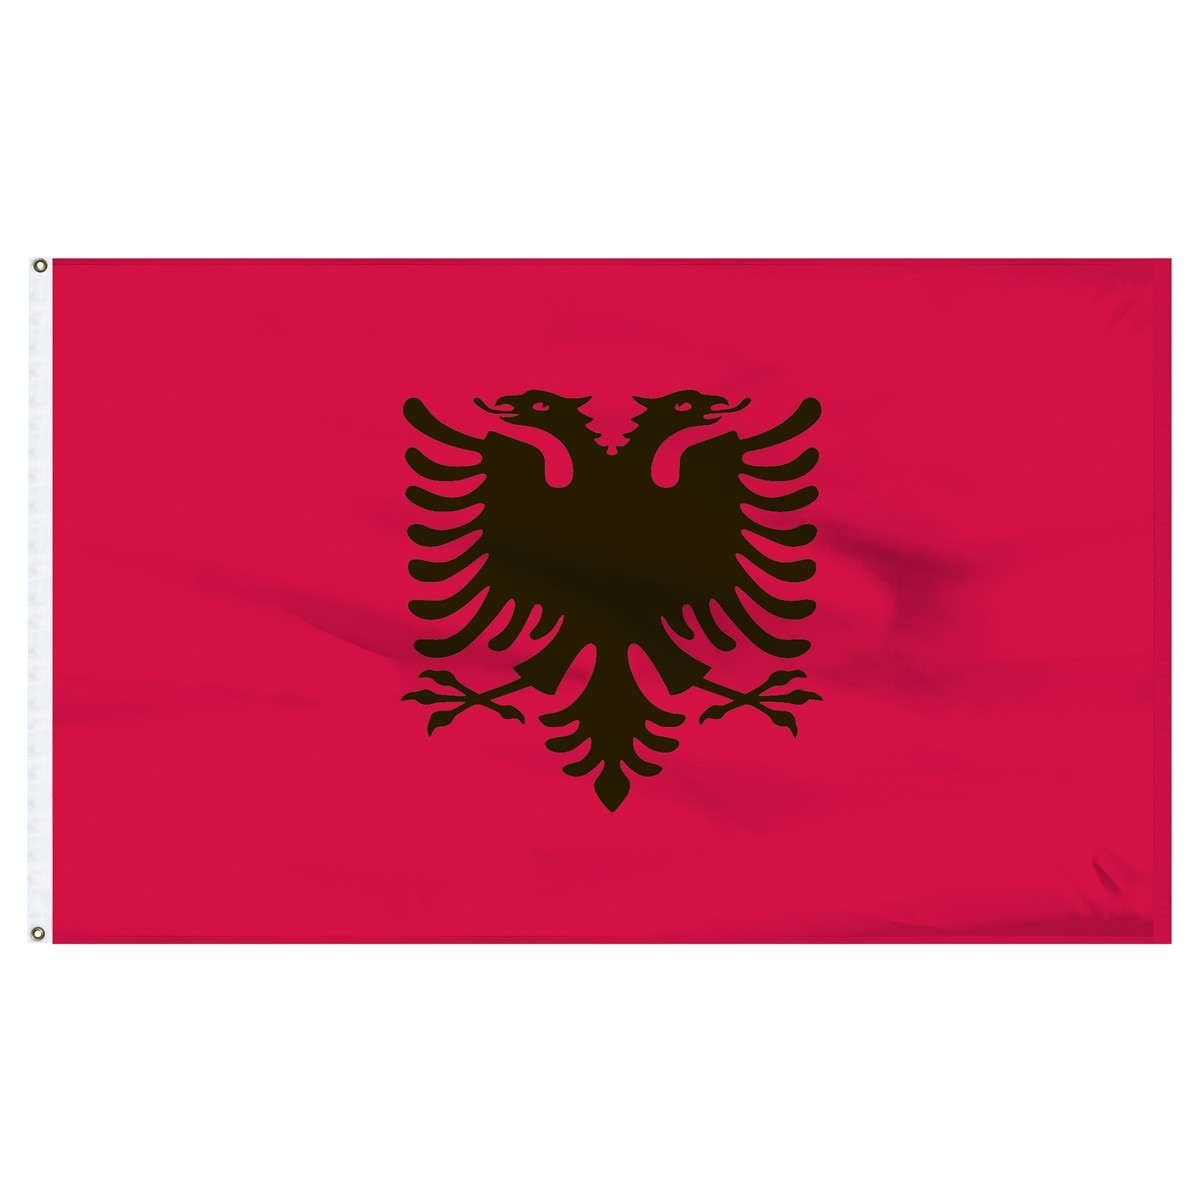 The flag of Albania for sale